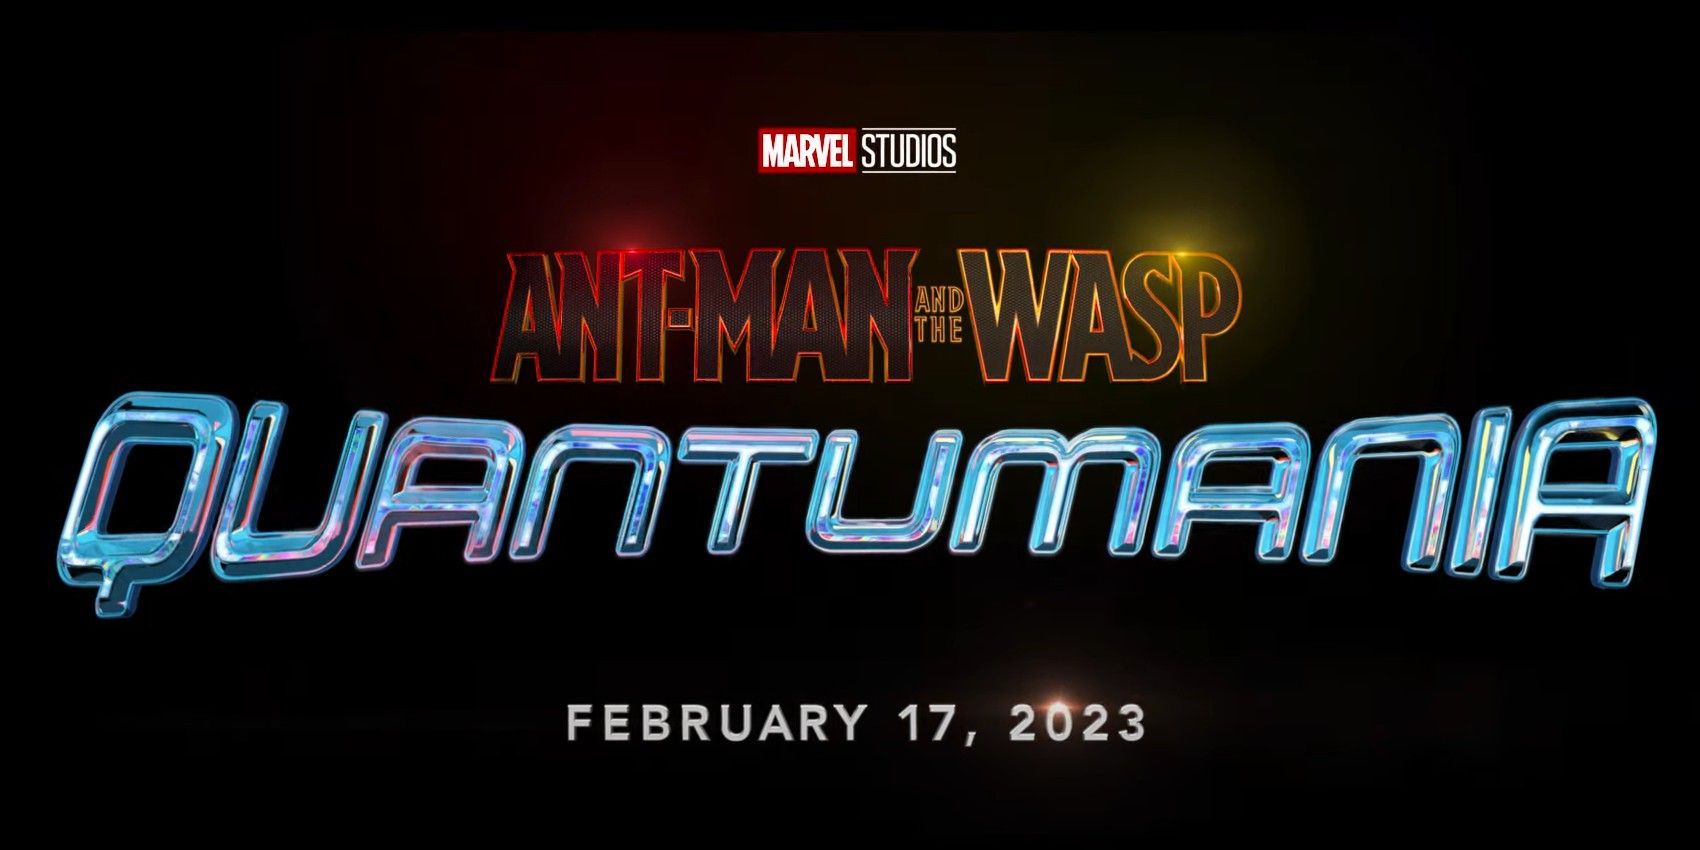 Title card and release date for Ant-Man and the Wasp Quantumania